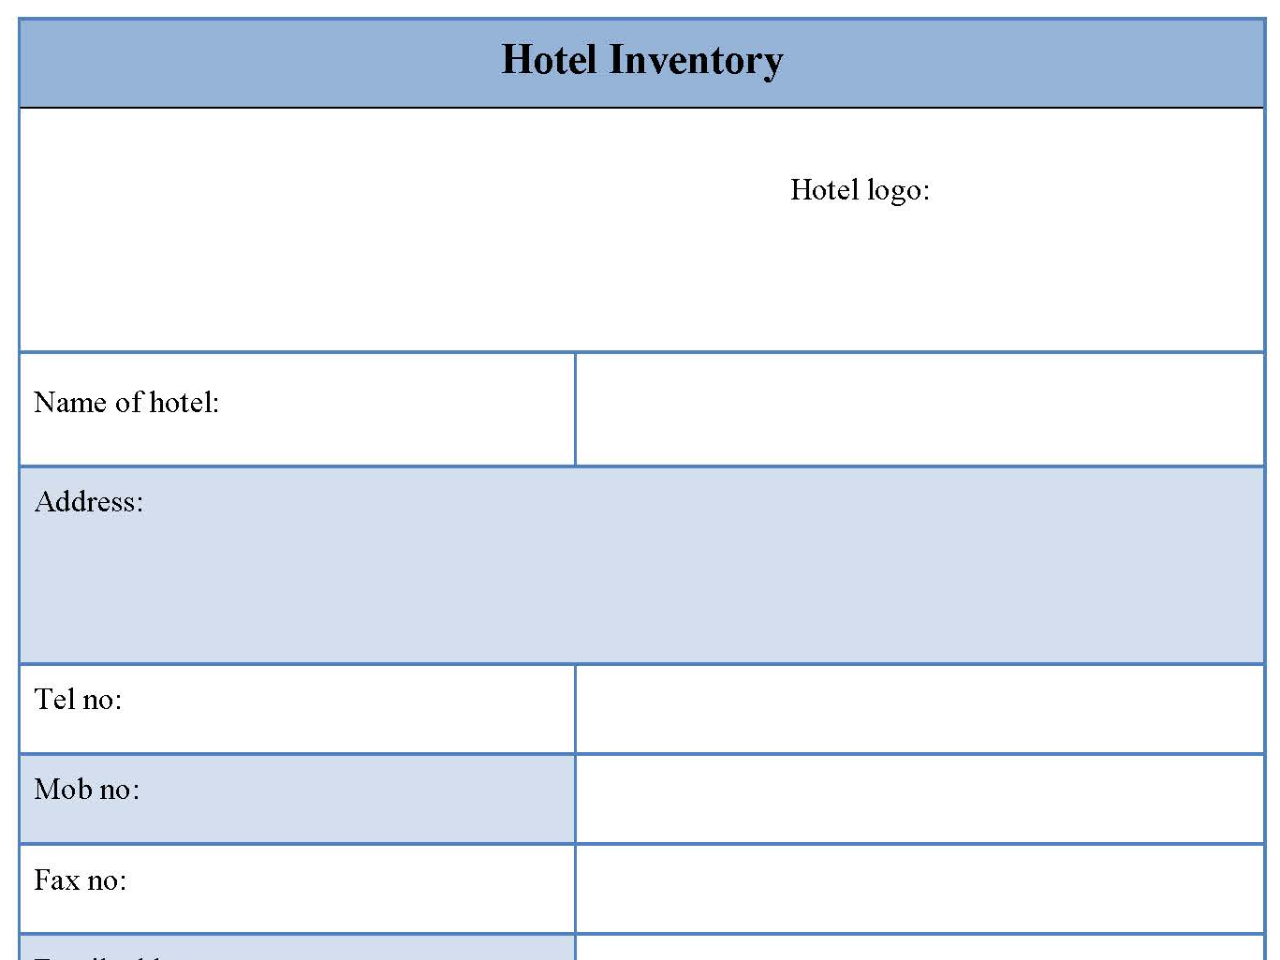 Hotel Inventory Form